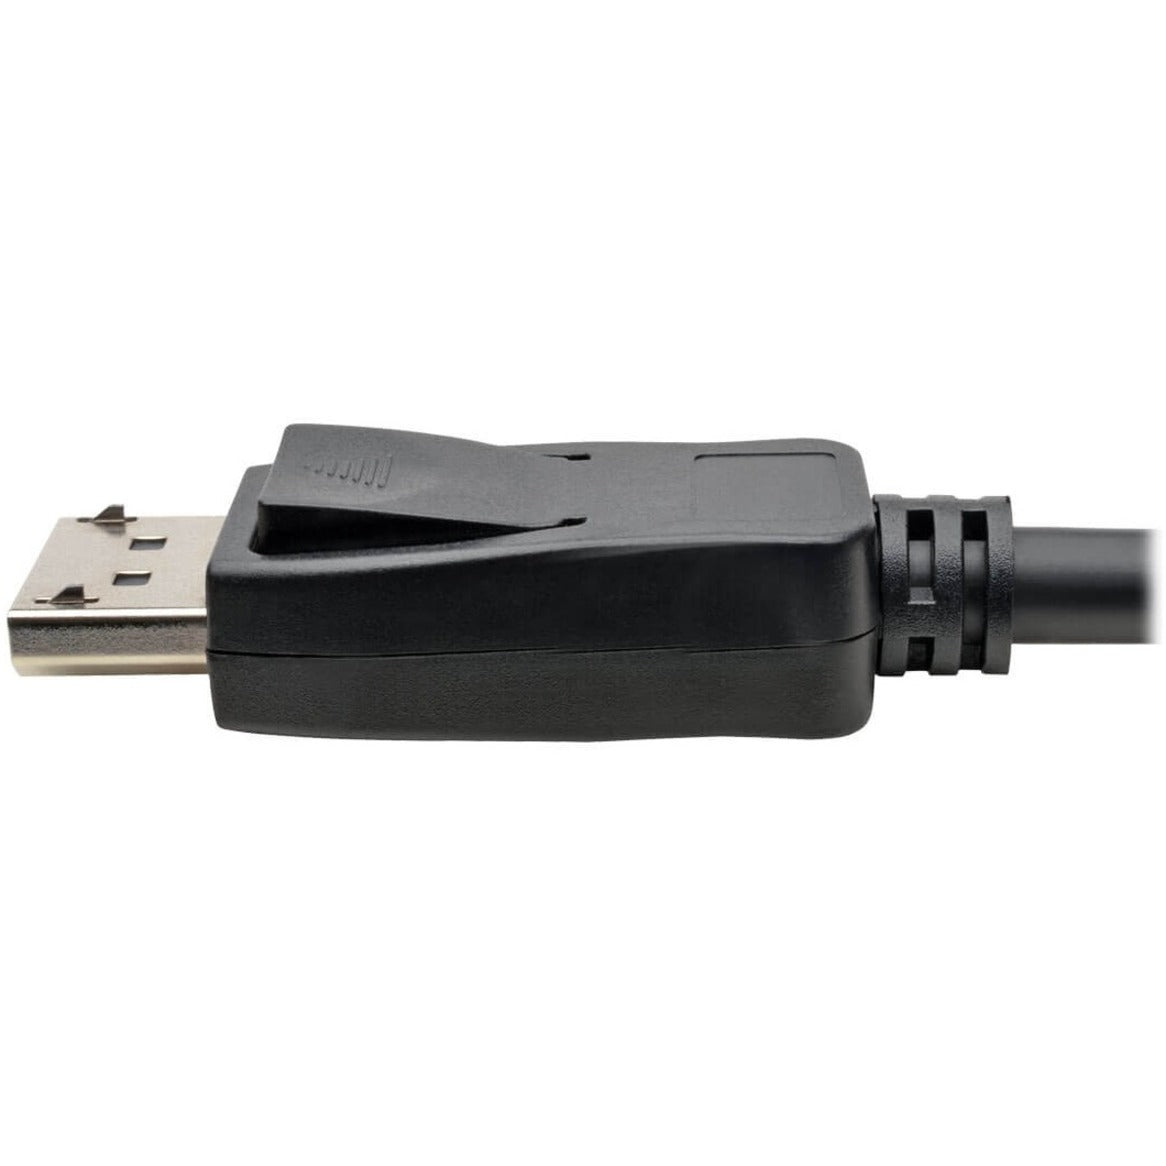 Tripp Lite P582-010-HD-V2A DisplayPort 1.2a to HDMI Active Adapter Cable (M/M), 10 ft.